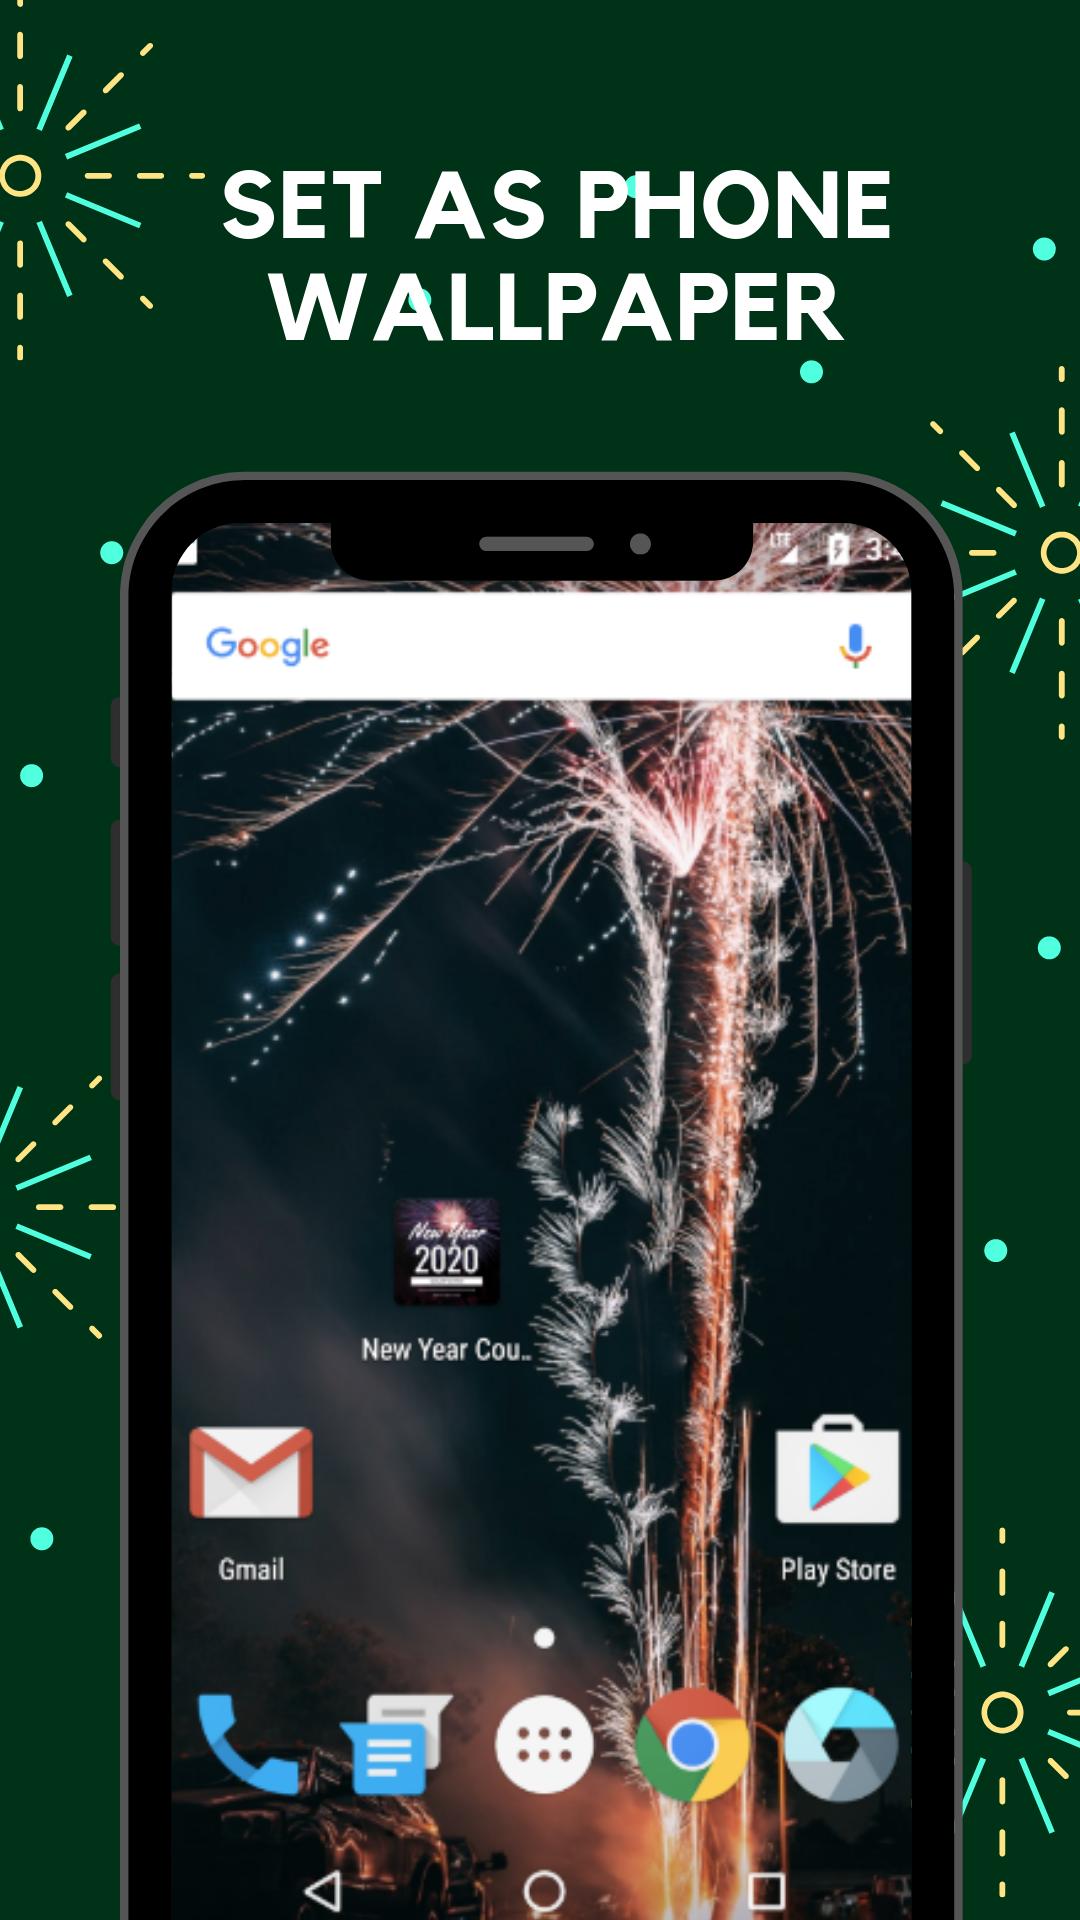 New Year Countdown Wallpaper For Android Apk